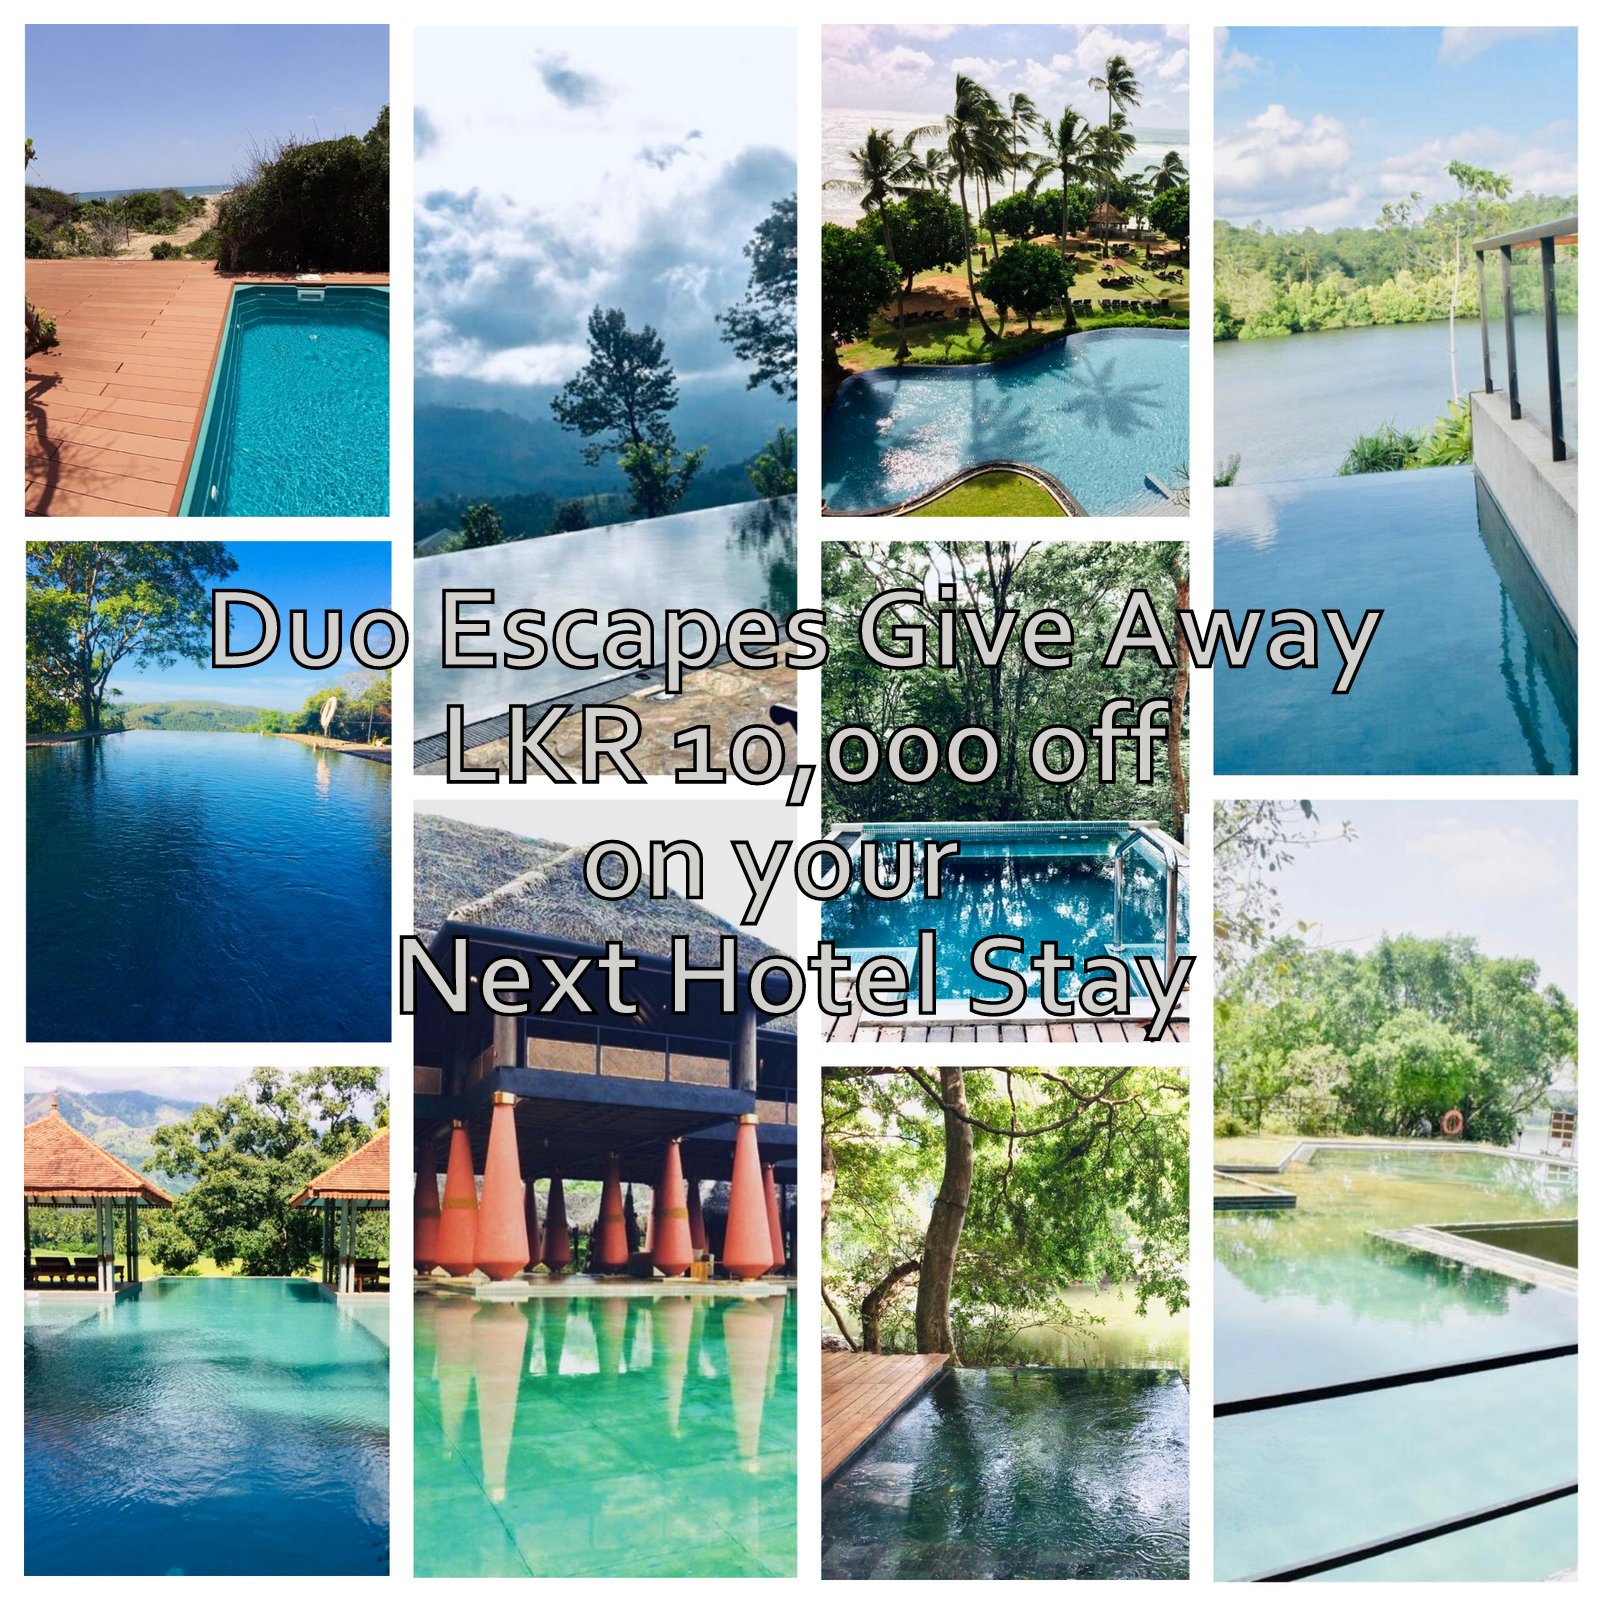 Duo Escapes Give Away: Enjoy LKR 10,000 off on your Next Hotel Stay!